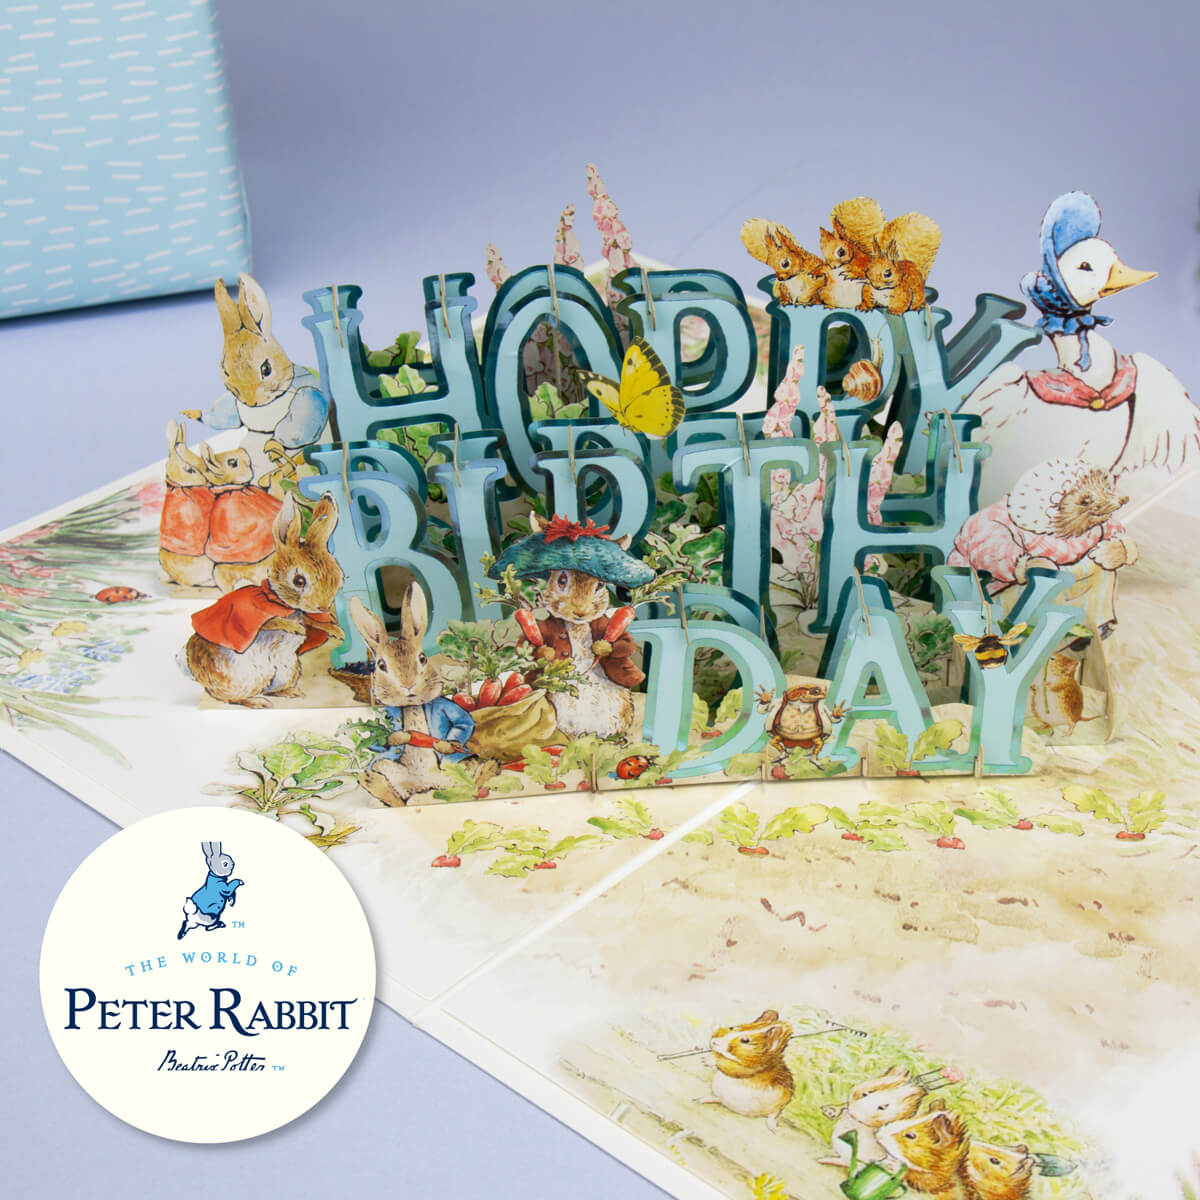 Peter Rabbit Birthday Card close up lifestyle image.  Blue 'Hoppy Birthday' surrounded by all characters from the iconic Beatrix Potter tale